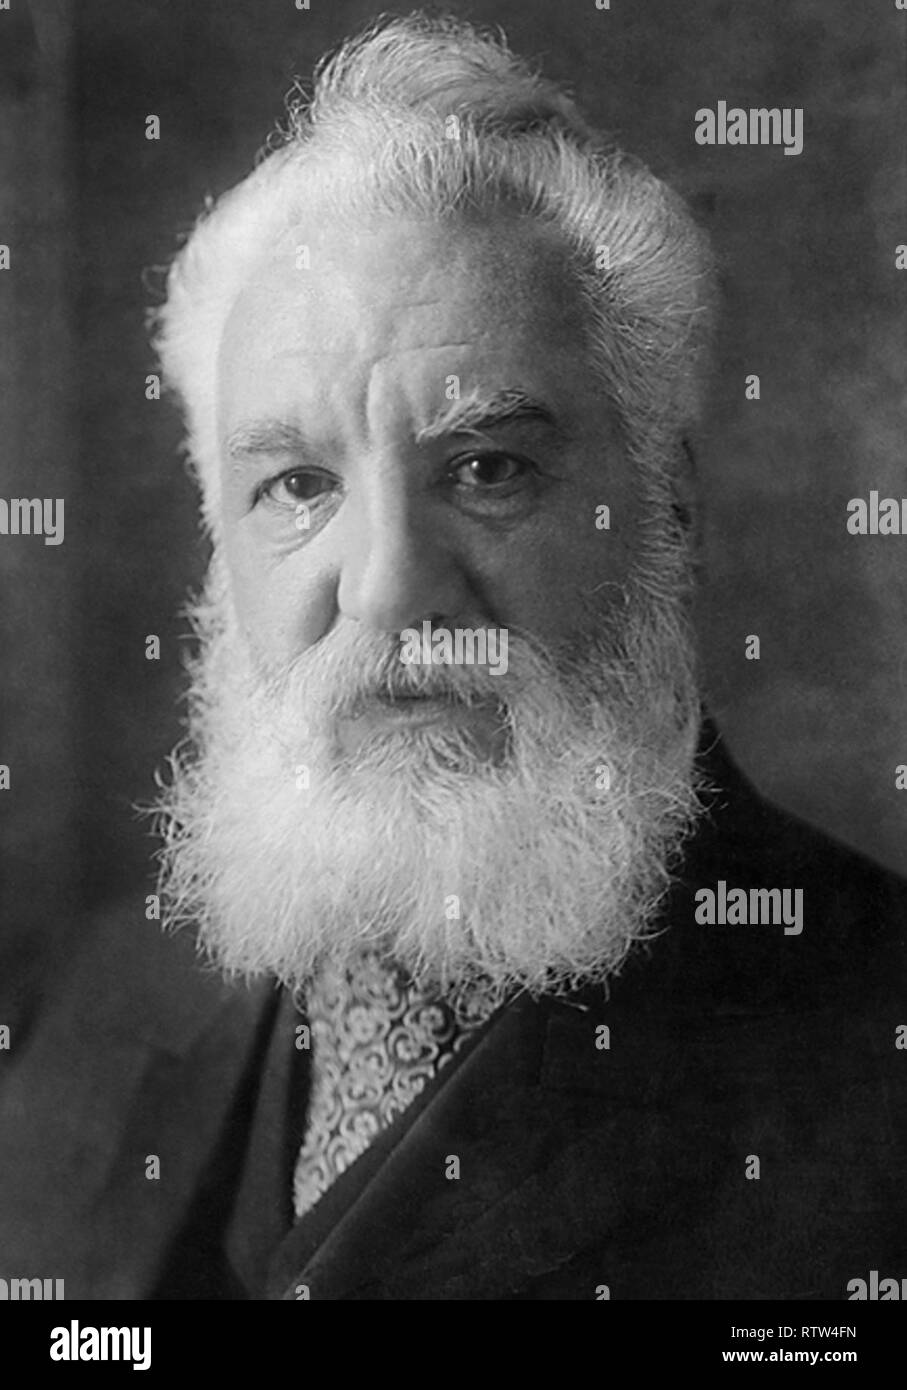 Alexander Graham Bell scottish inventor scientist engineer and inventor of the telephone photograph circa 1900 Stock Photo